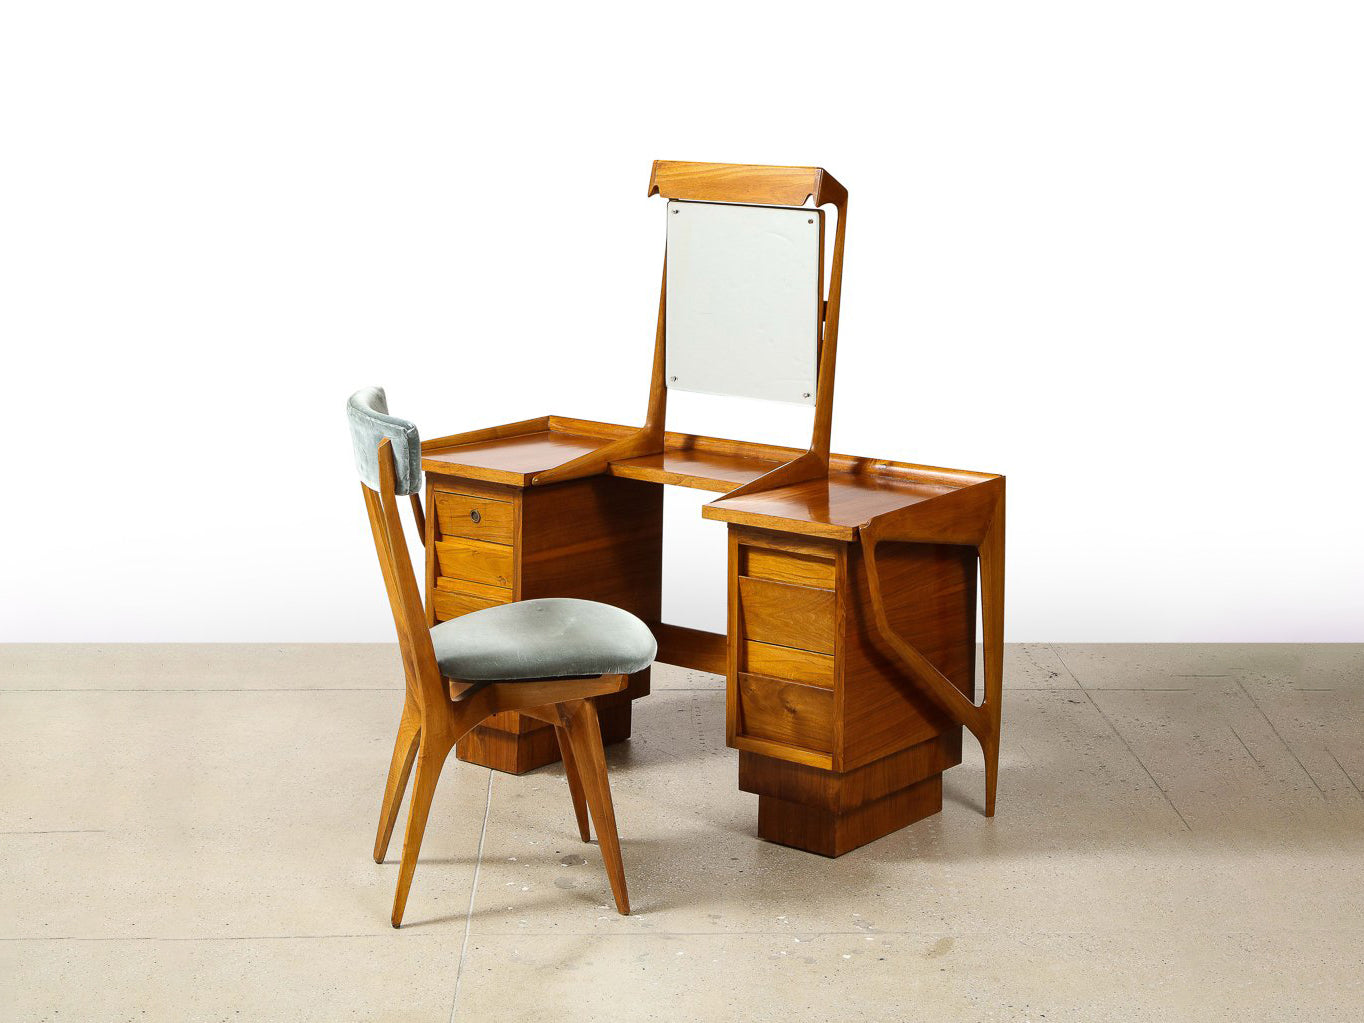 Unique Vanity/ Dressing Table & Chair by Ico & Luisa Parisi